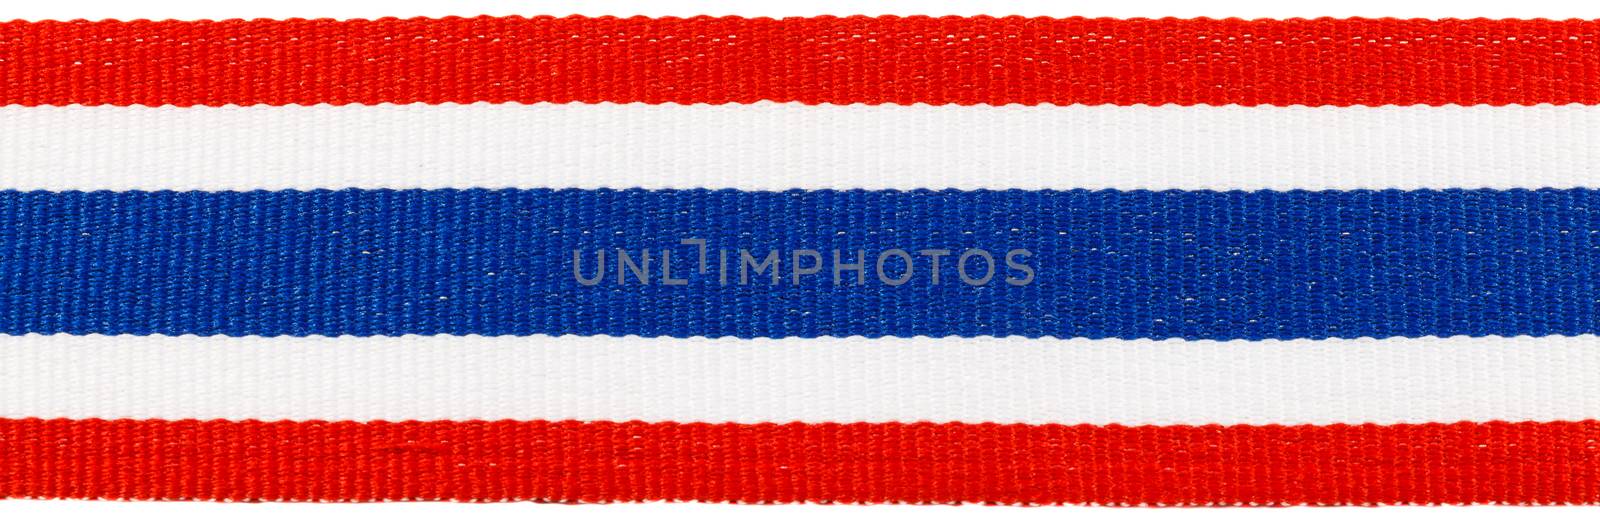 ribbon with thai flag pattern on white background(isolated)